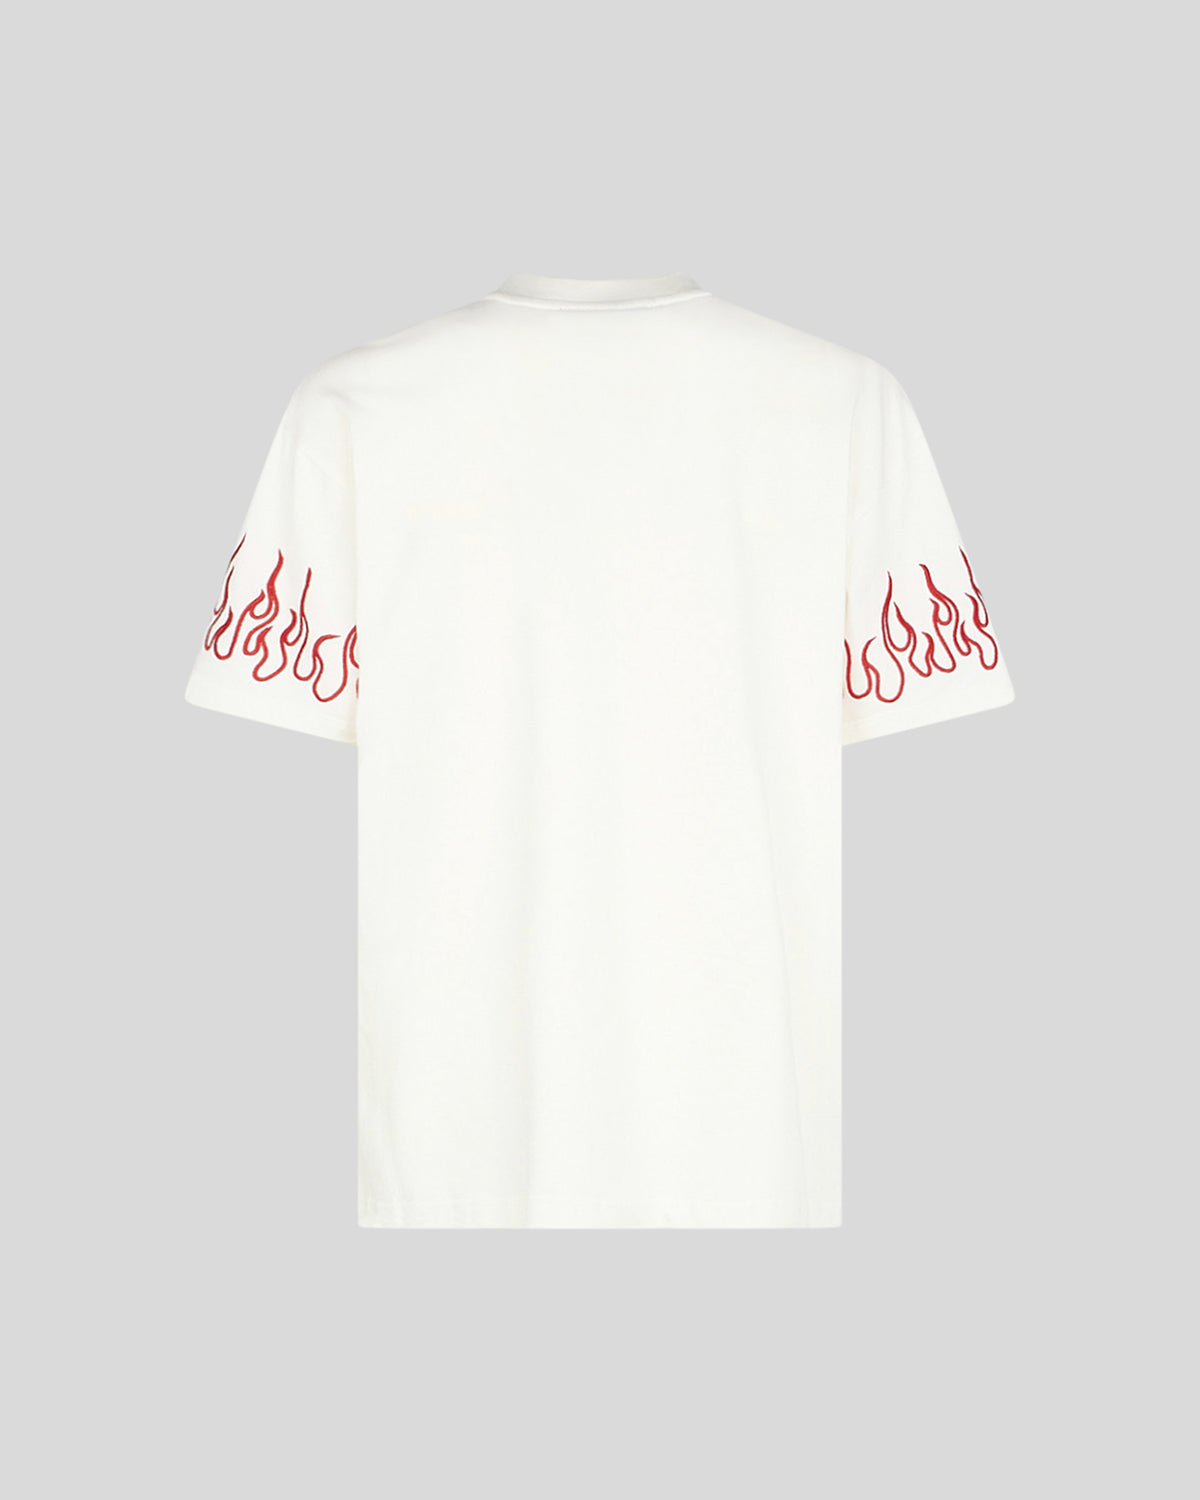 VISION OF SUPER WHITE TSHIRT WITH RED EMBROIDERED FLAMES